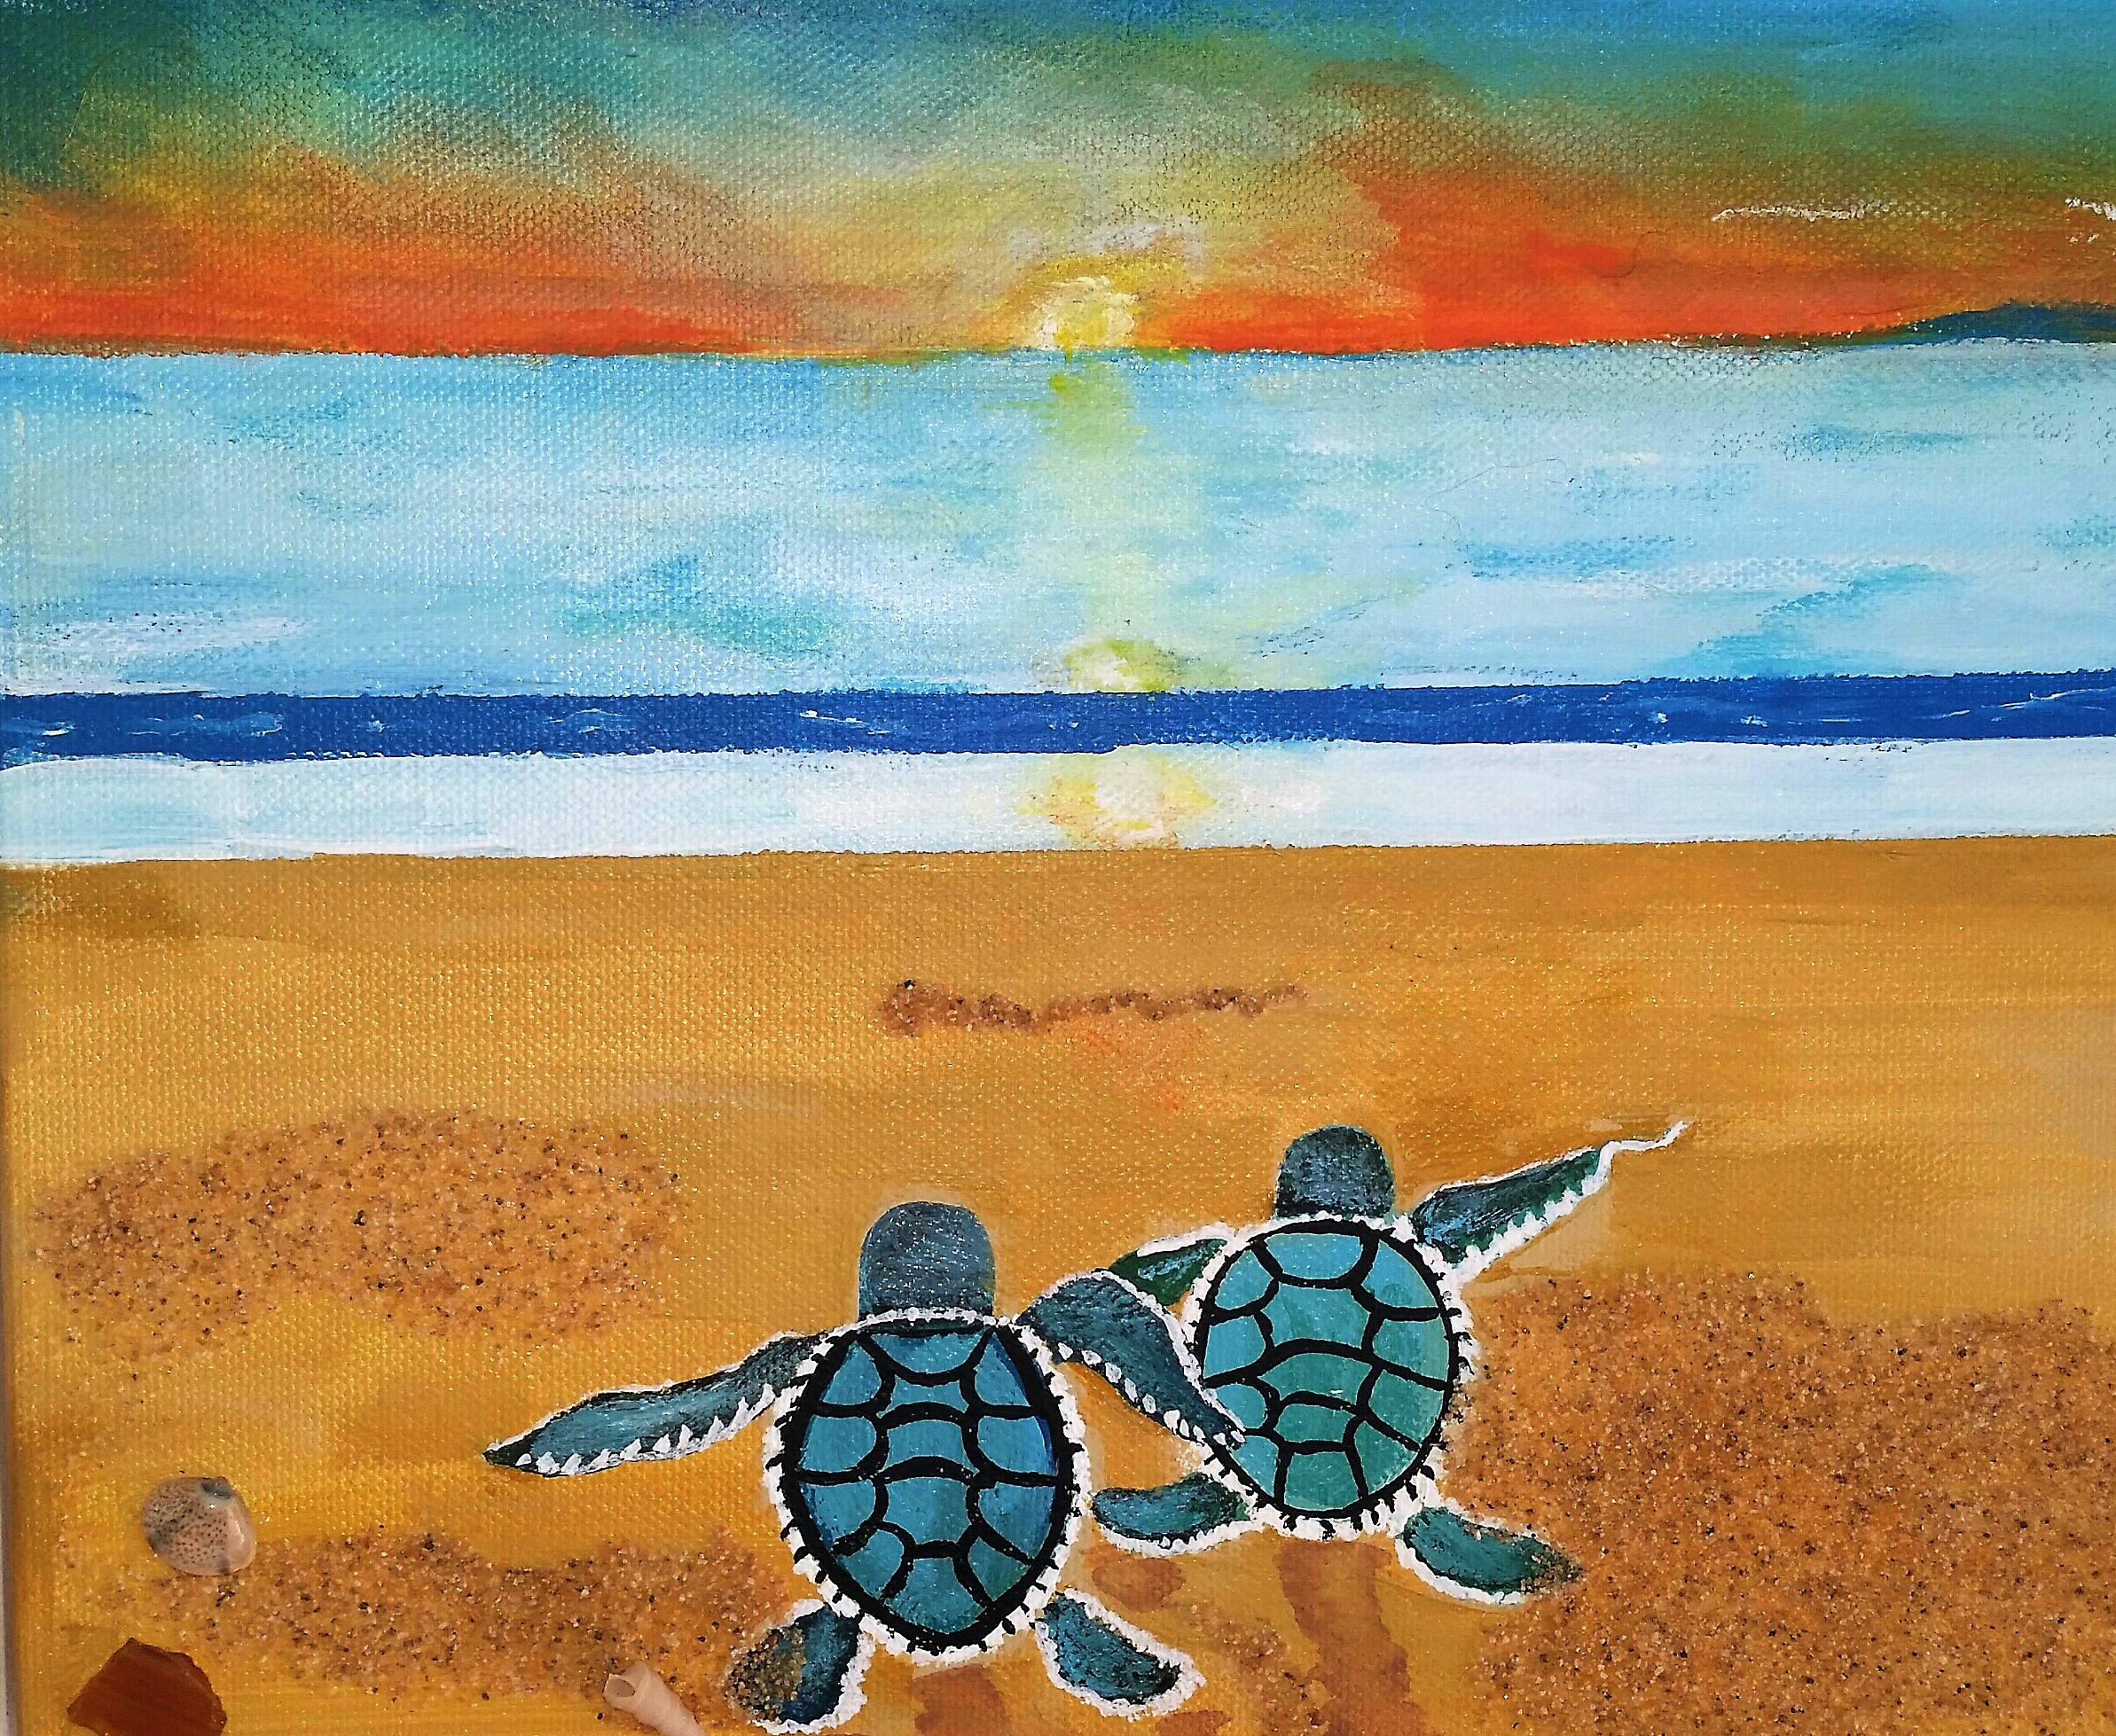 Two Turtles 12 x 9  $75